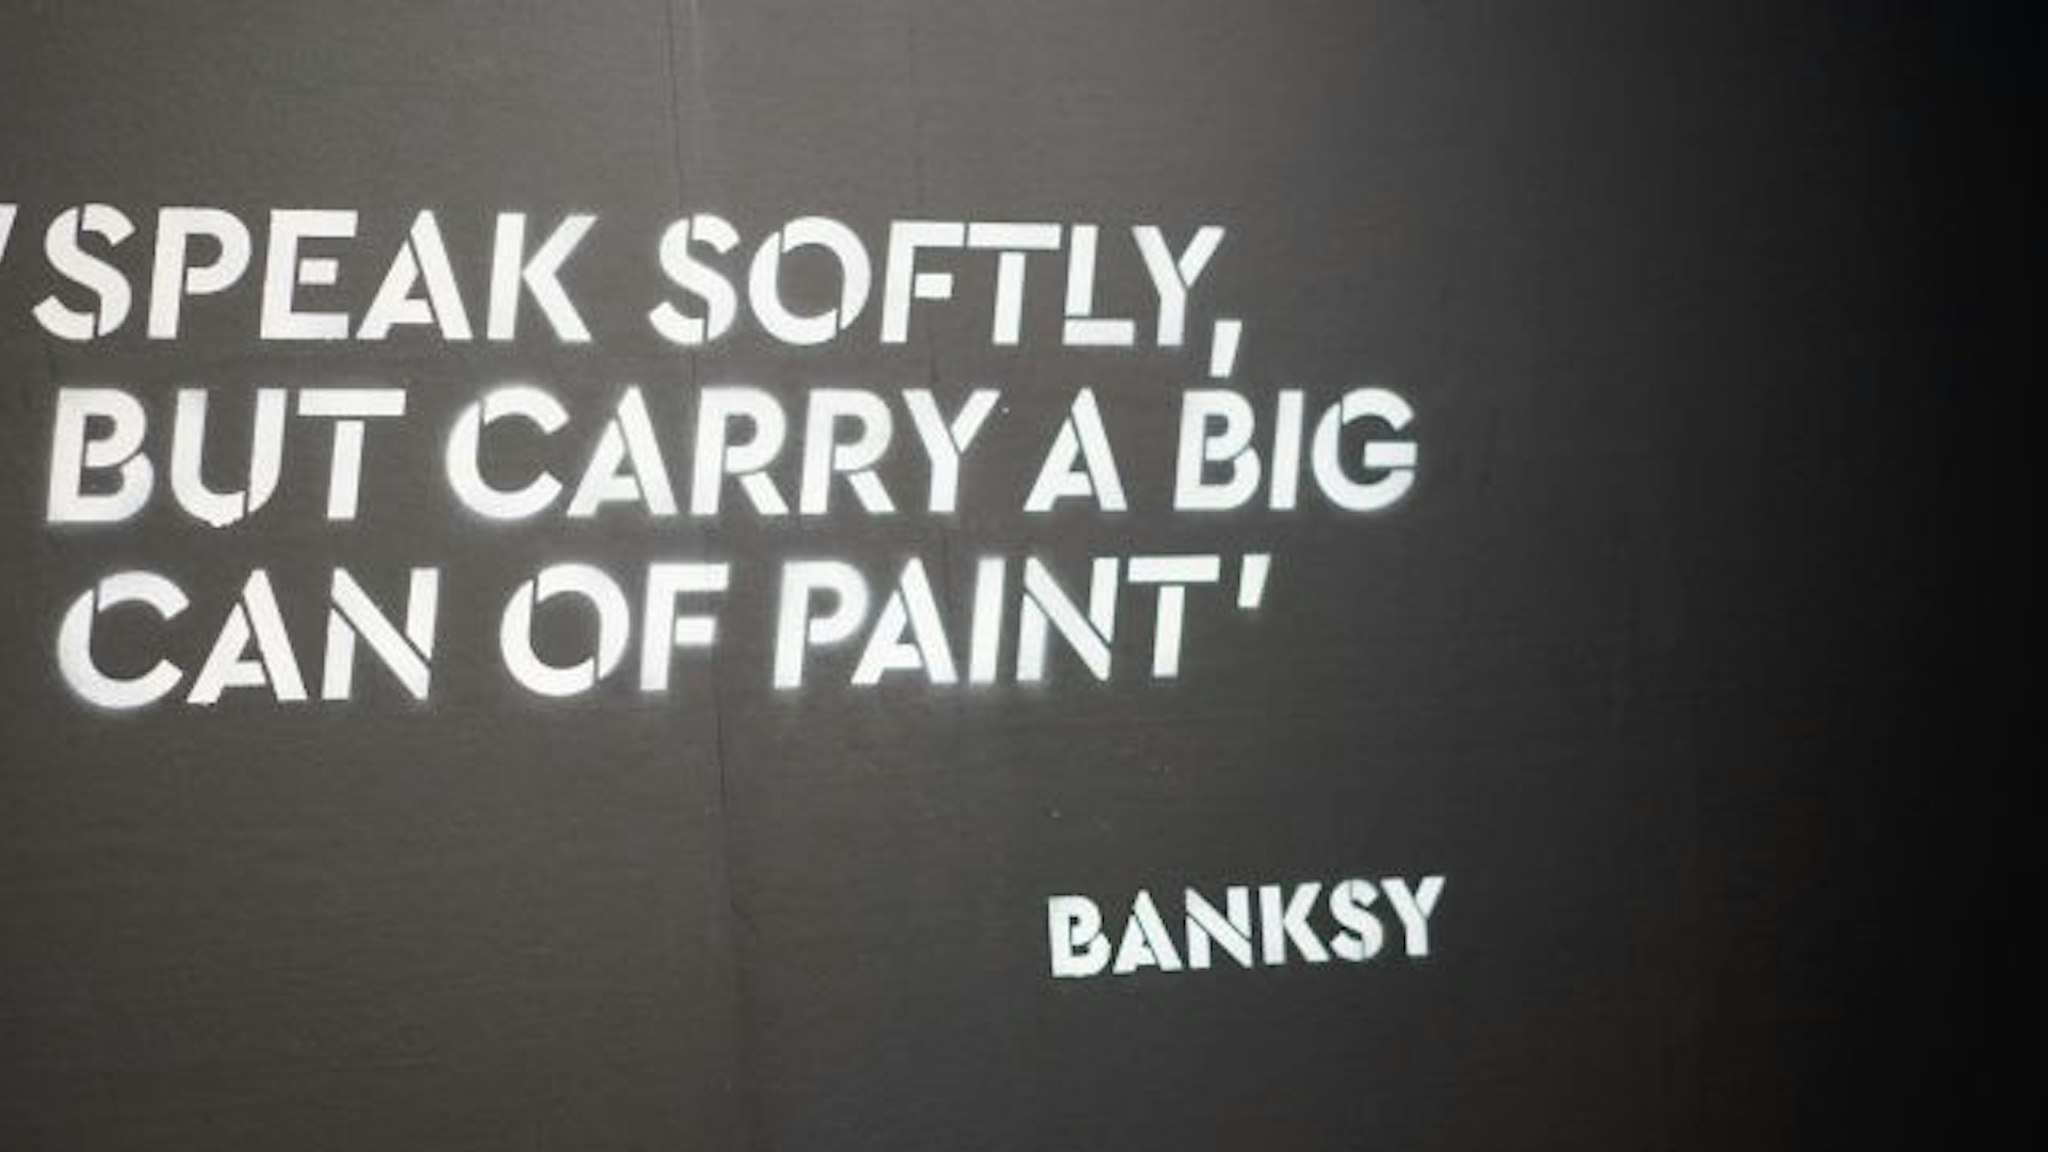 YOKOHAMA, JAPAN - MARCH 27: A Banksy quote is seen on the wall at the 'Banksy Genius or Vandal?' exhibition at Asobuild on March 27, 2020 in Yokohama, Japan. The exhibition, open amid the COVID-19 situation in the Tokyo suburb since its opening on March 15, 2020, will close for the coming weekend responding to the stay-at-home request ordered by Kanagawa and neighboring Tokyo Metropolitan governments this week. (Photo by